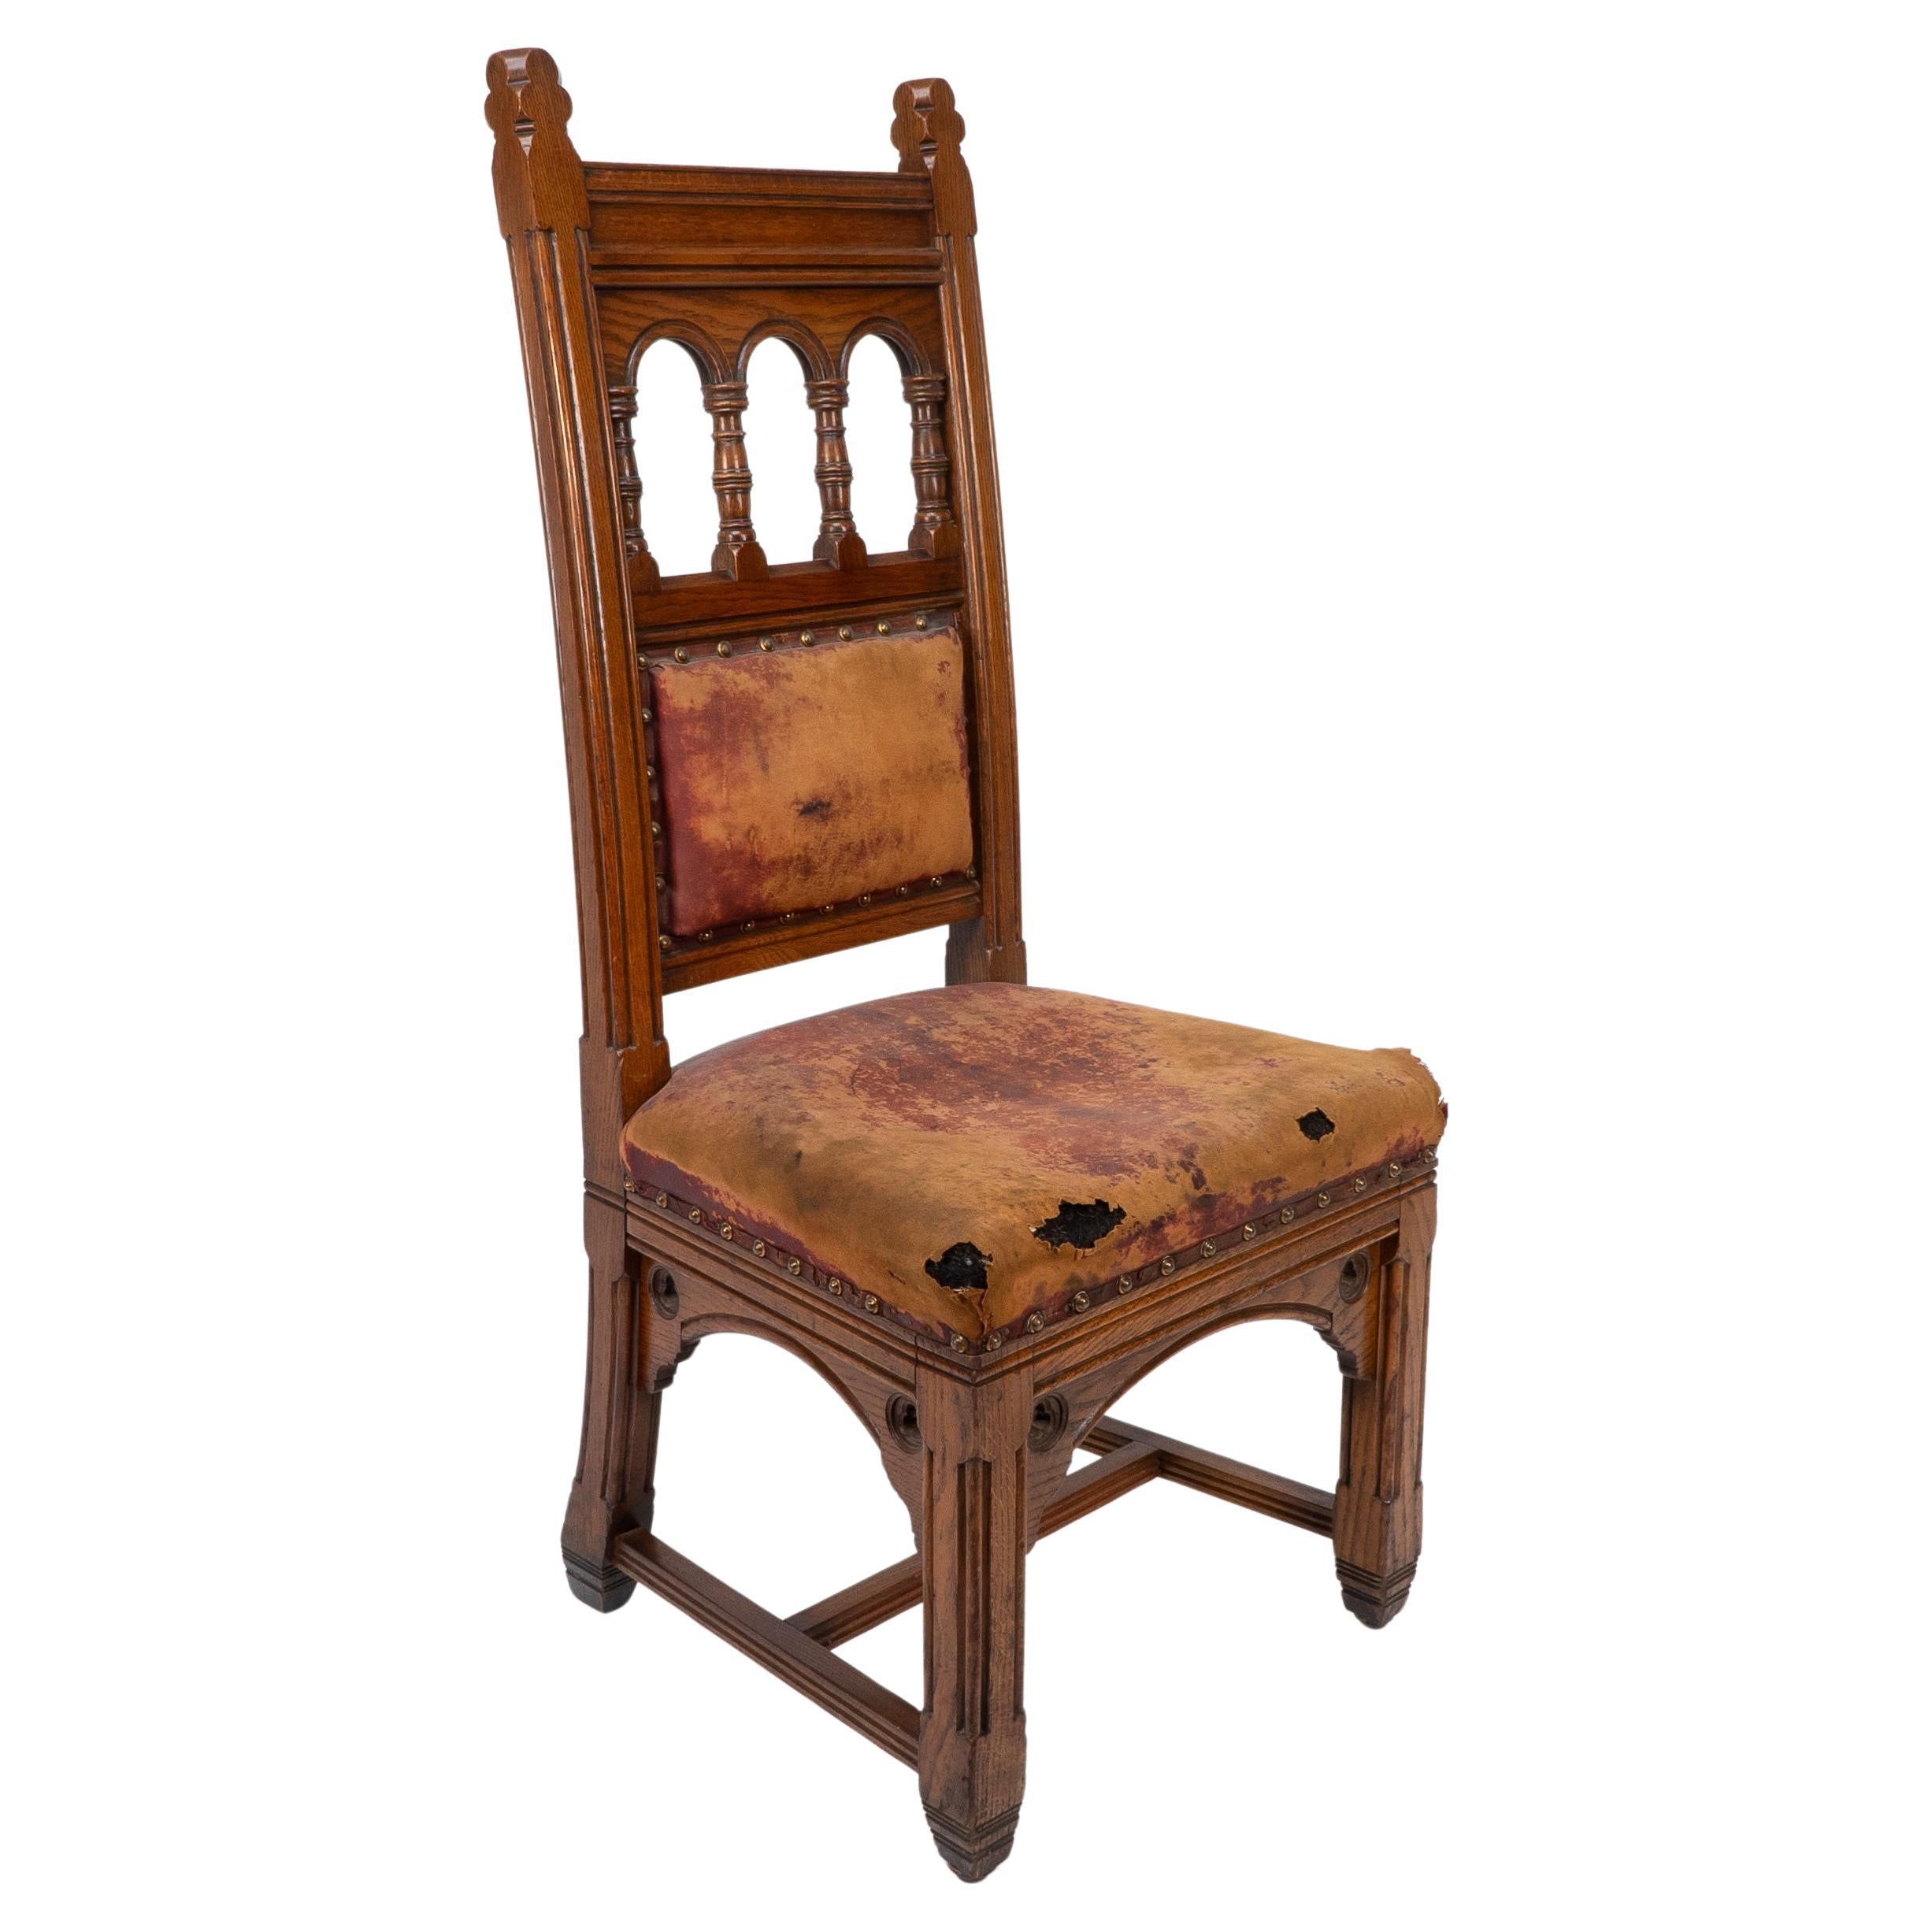 Bruce Talbert, a Gothic Revival Tall Back Oak Chair with the Original Upholstery